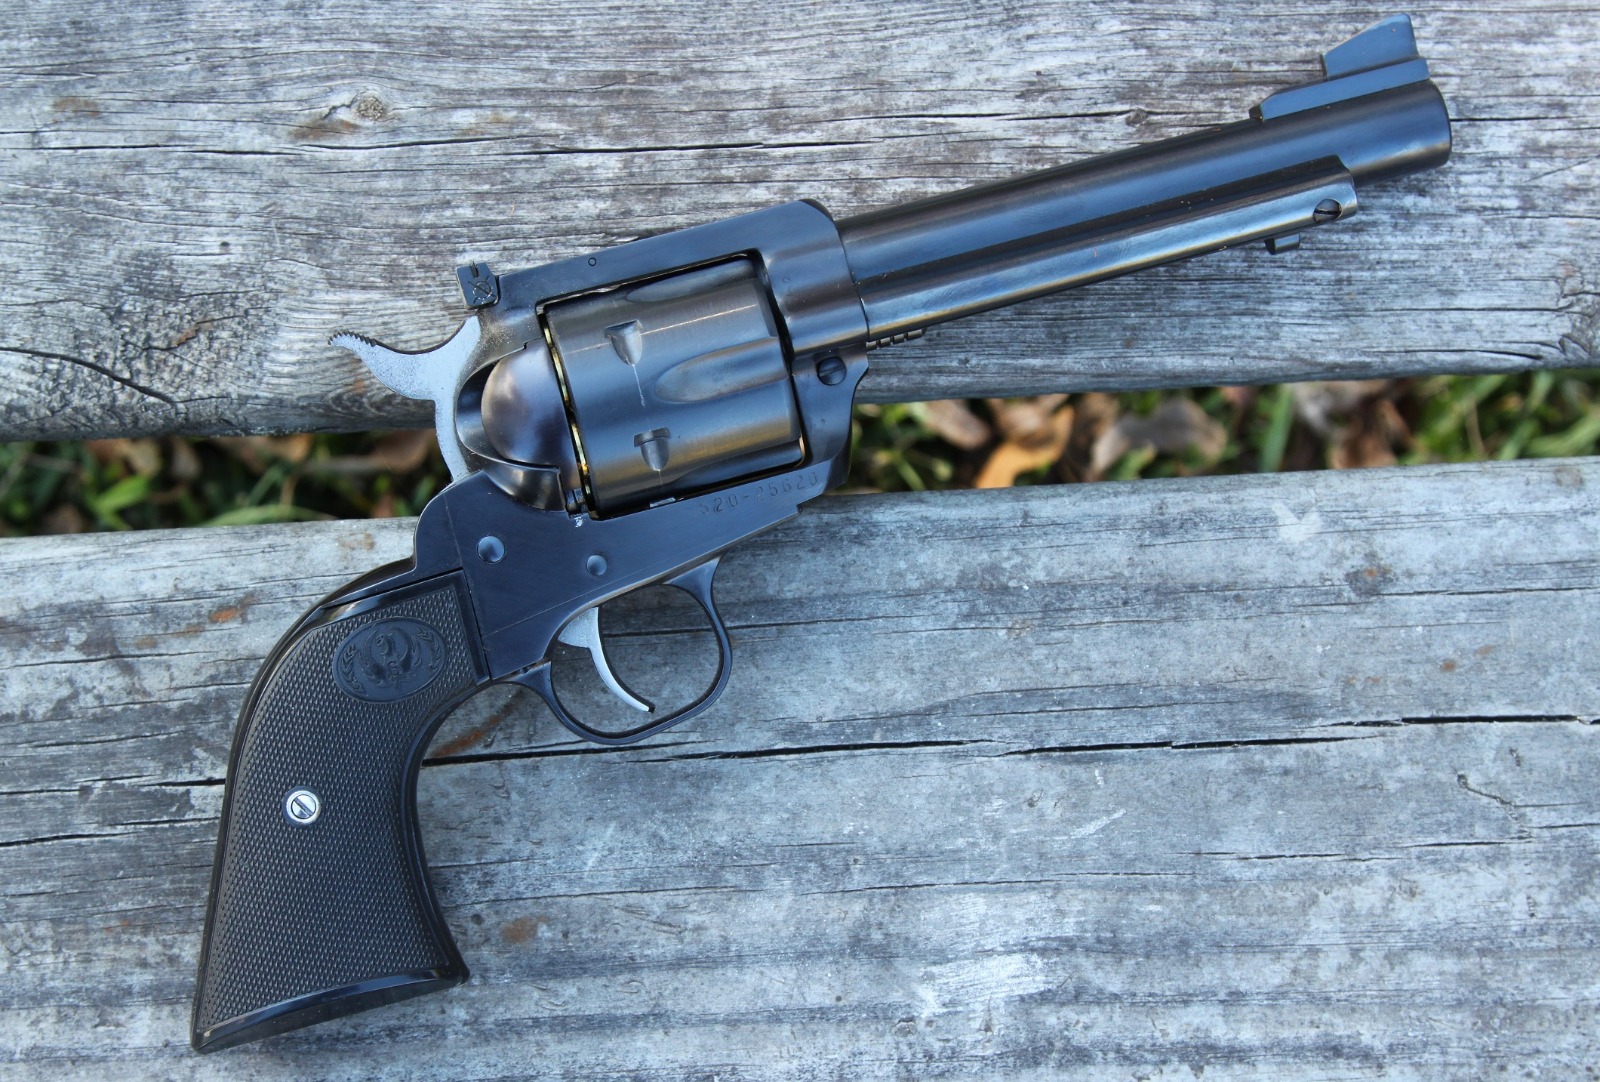 Ruger S Super Blackhawk 44 Magnum Is Both Popular And Powerful